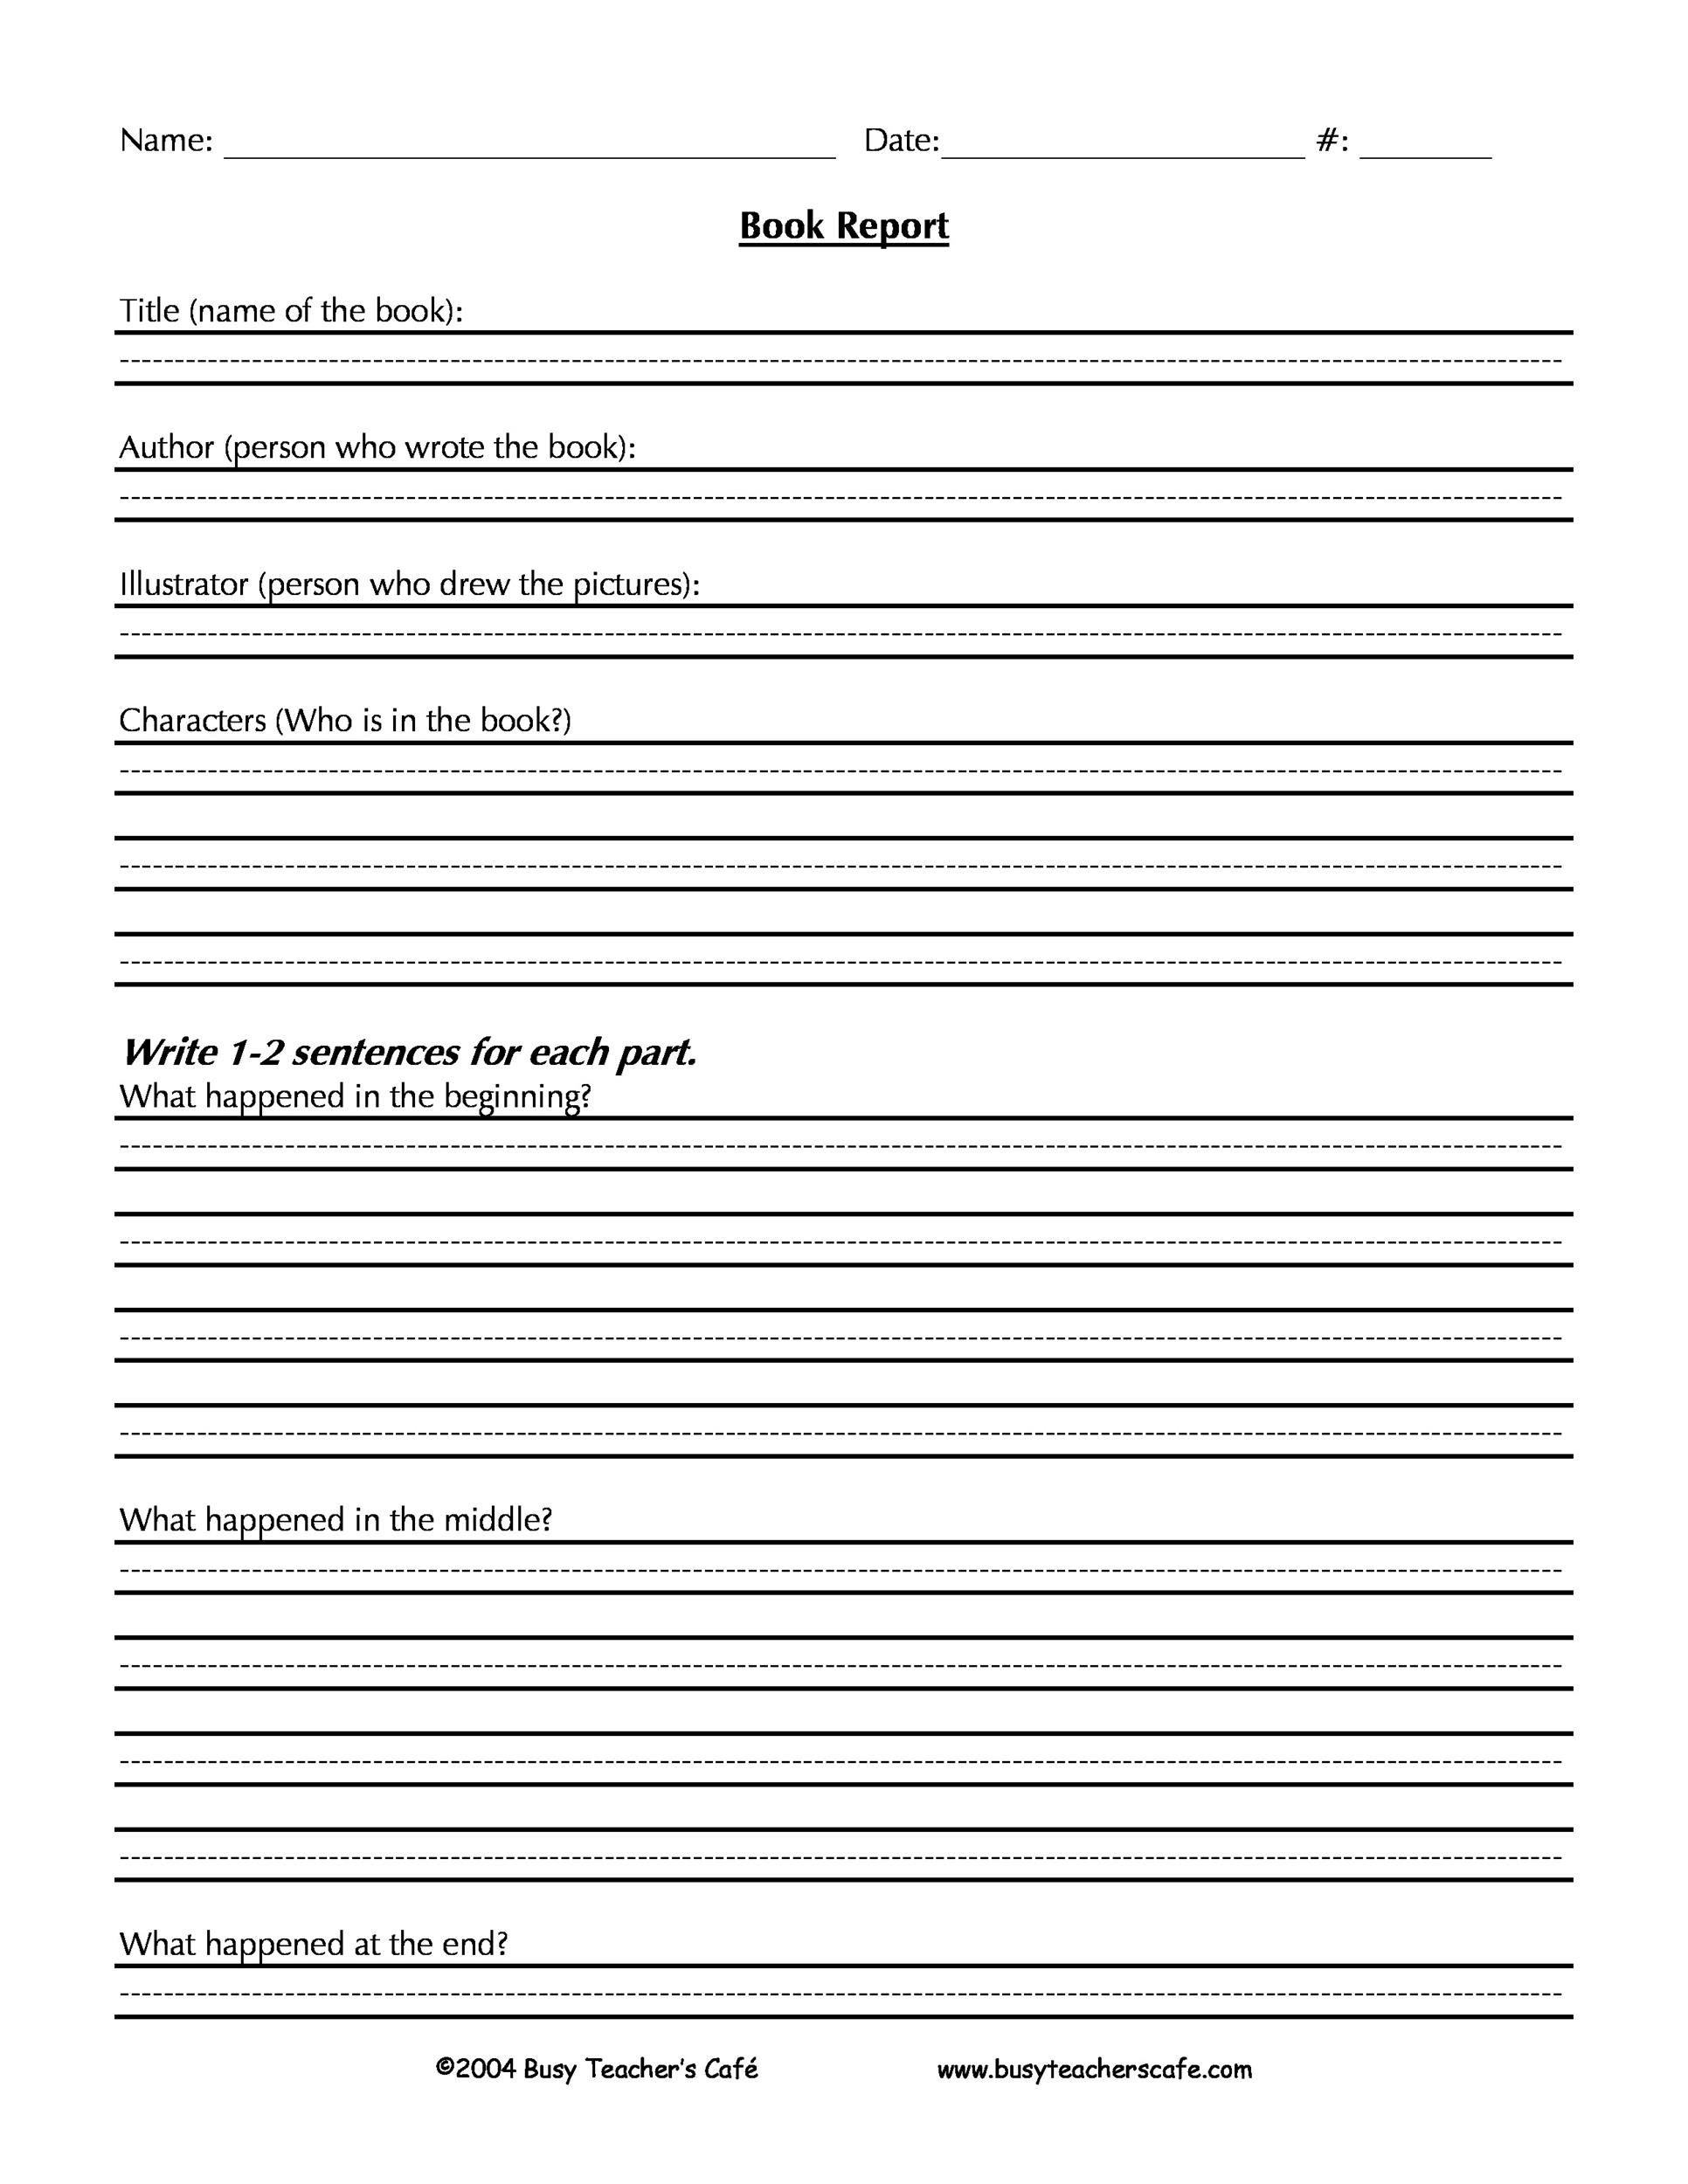 book report form for 2nd grade